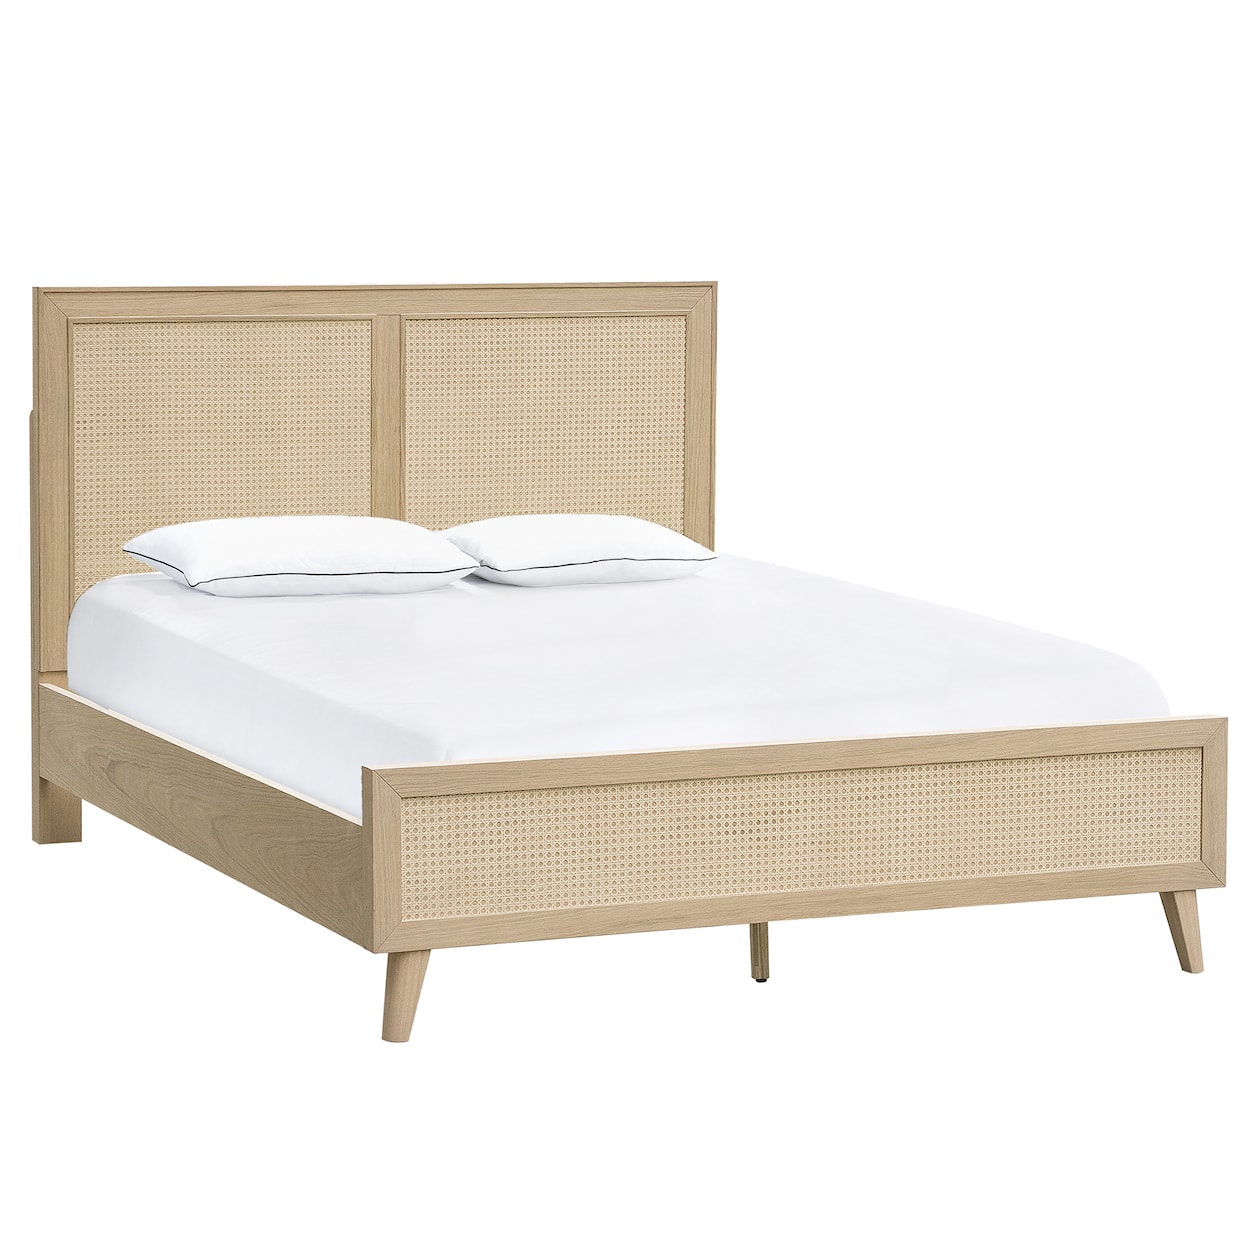 Accentrics Home Fashion Beds Wood Bed